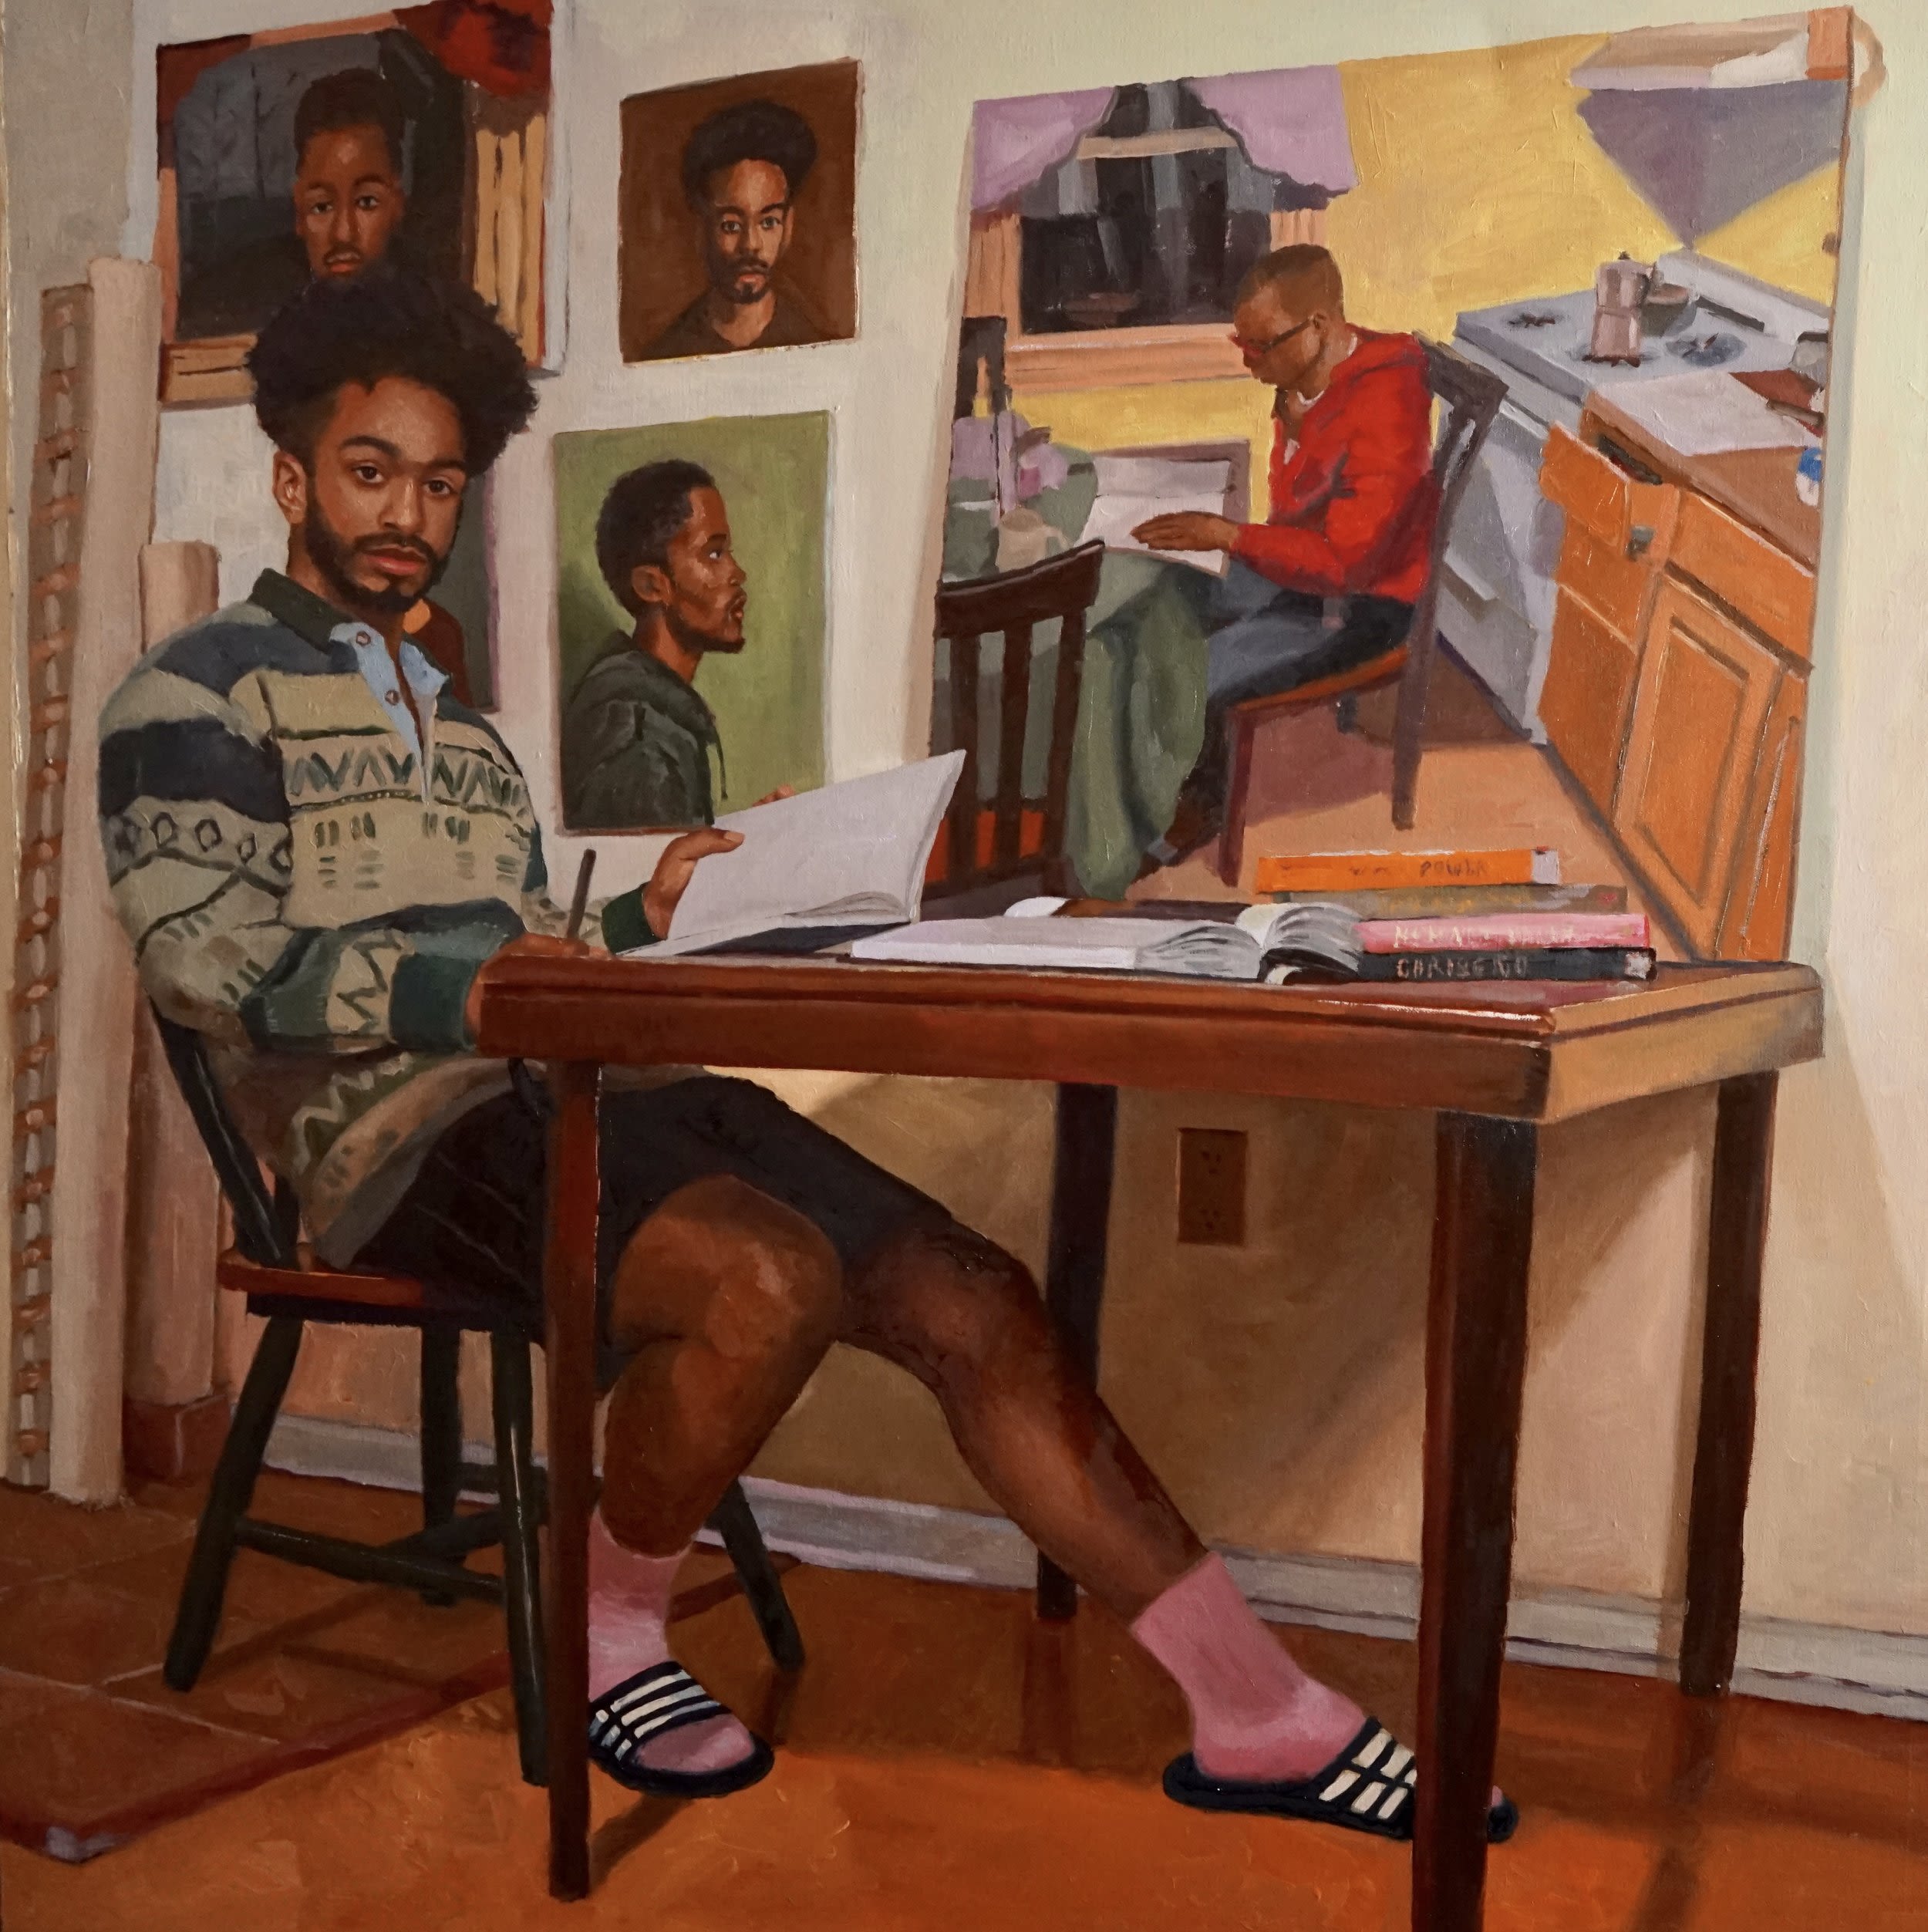 A painting of a young man in a sweater, shorts, and adidas slides sitting at a table, with paintings of men on the wall behind him